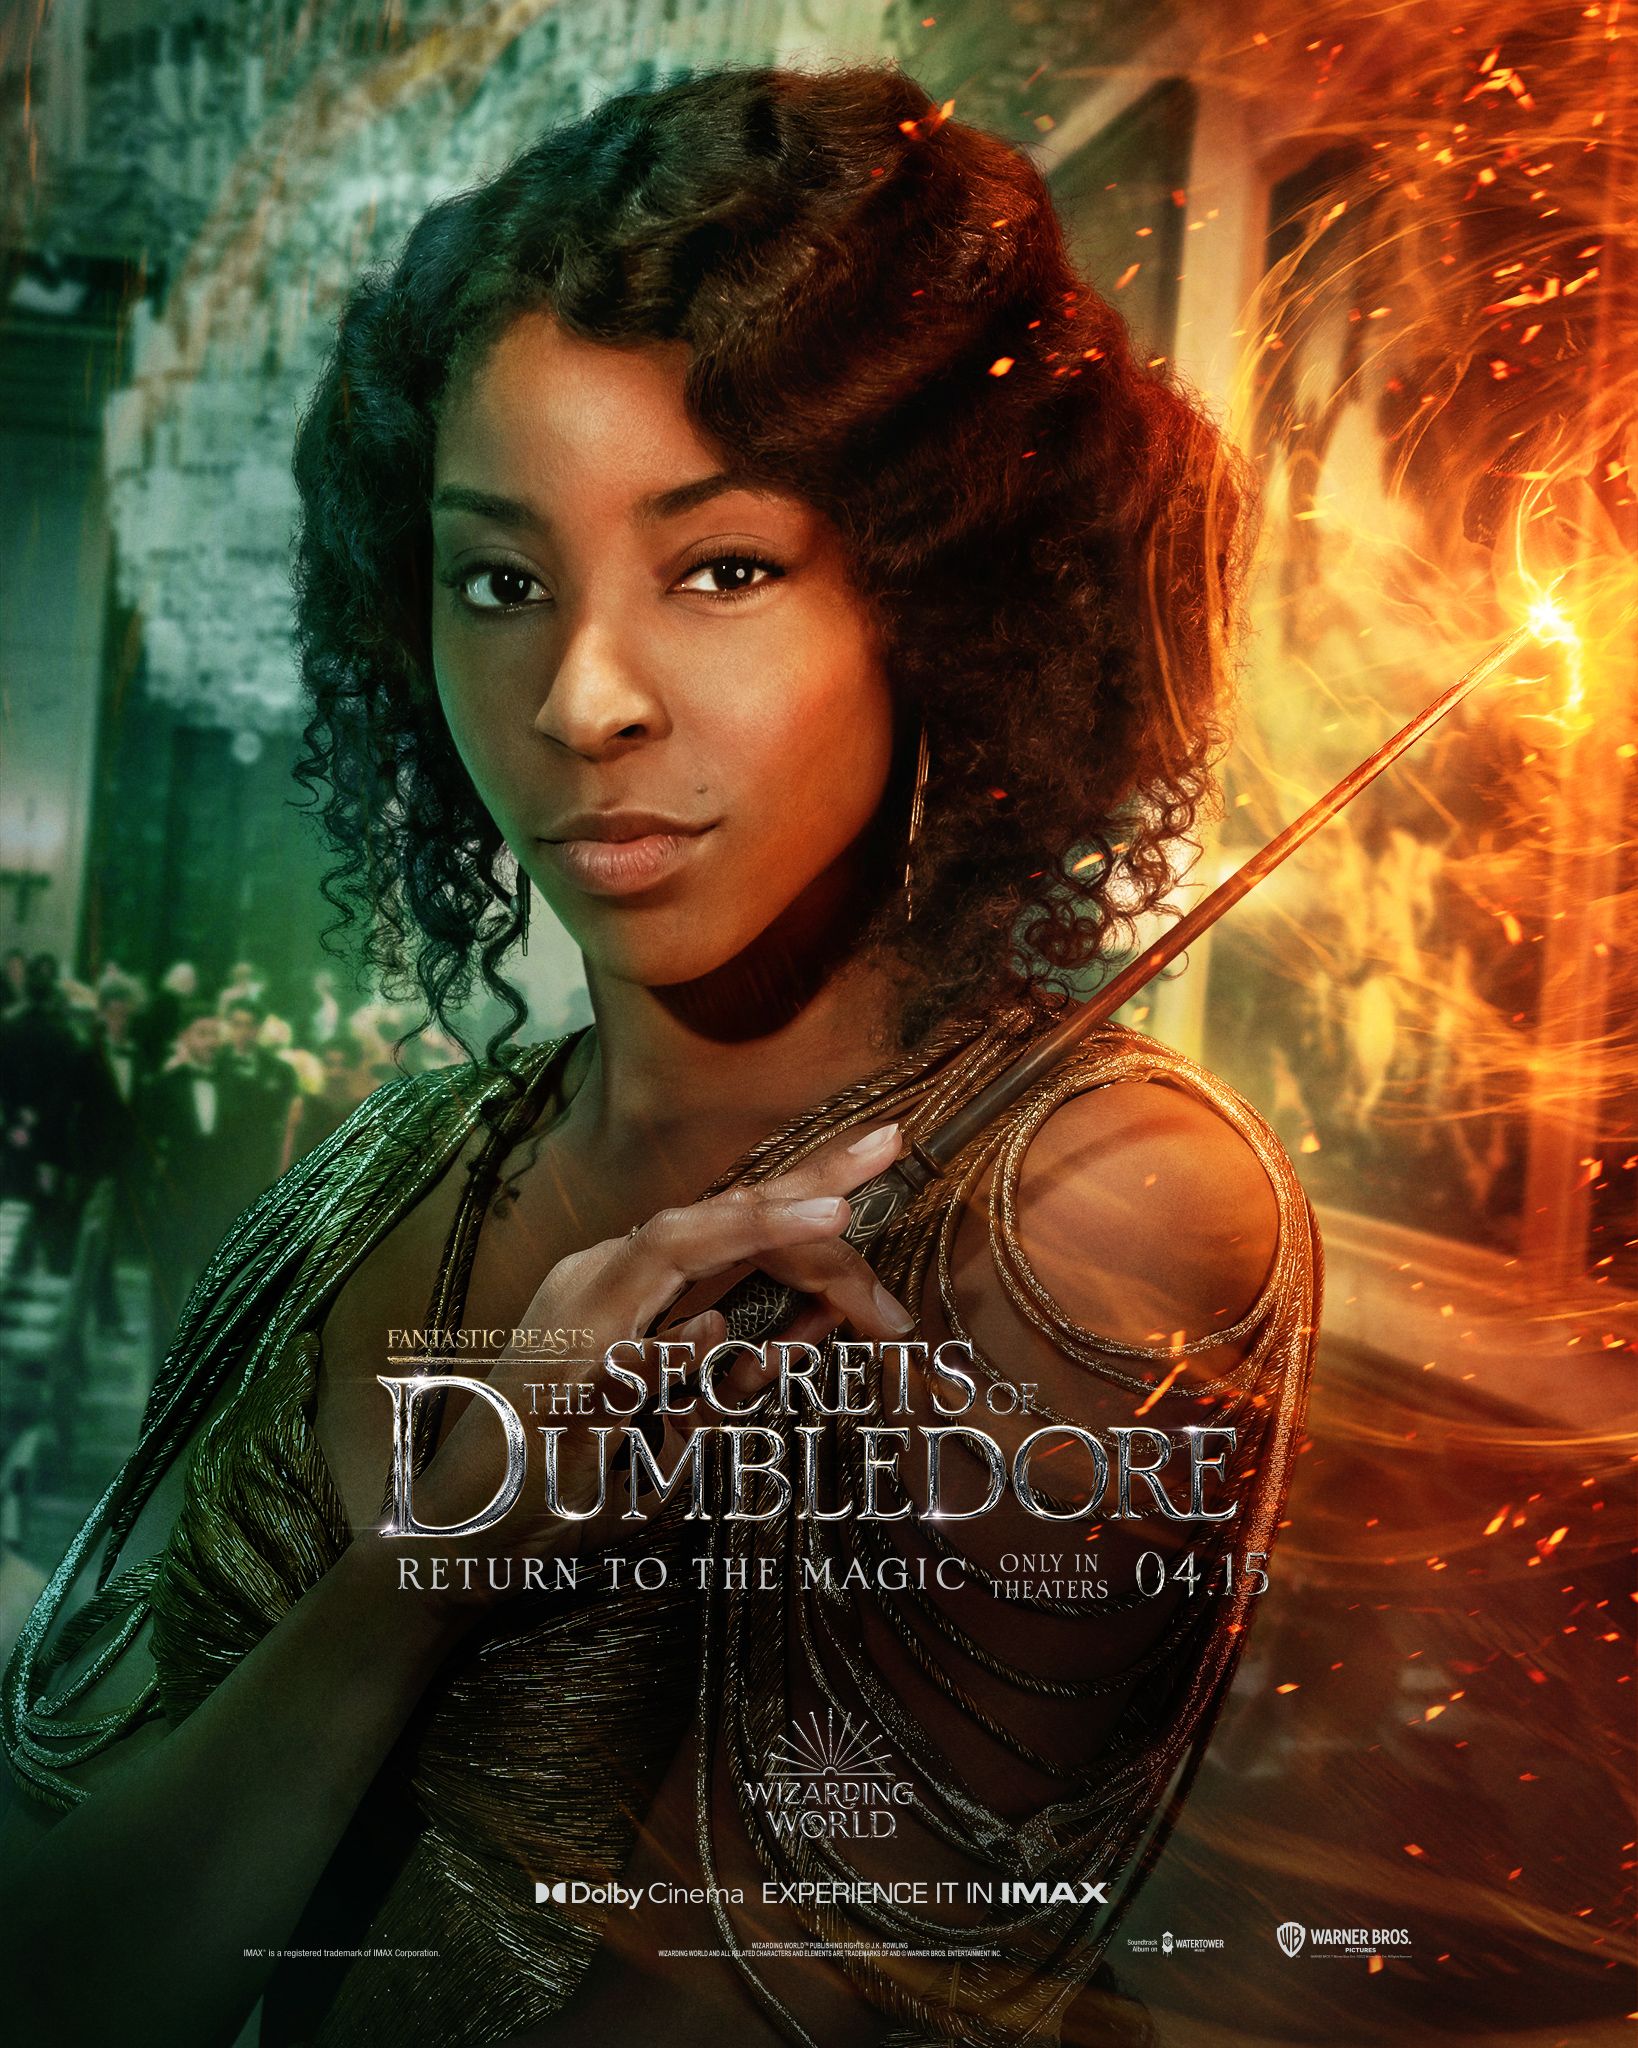 fantastic beasts character posters jessica williams